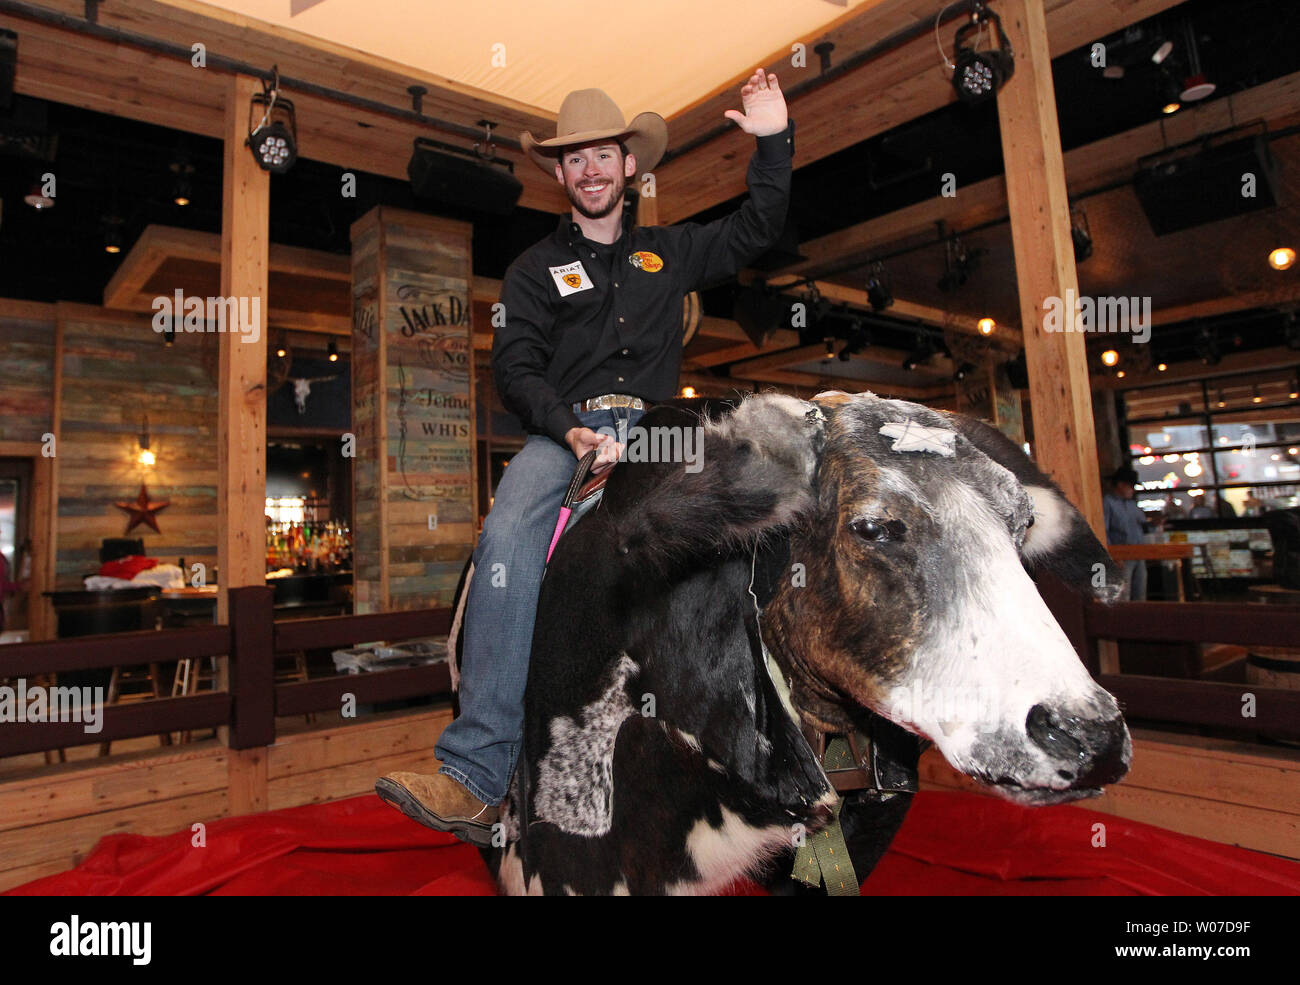 Professional bullrider Luke Snyder of Springfield, Missouri tries his hand at riding Ozzie, the mechanical bull during grand opening festivities at the PBR Bar in Ballpark Village in St. Louis on April 4, 2014. The PBR Bar is the seventh one to open in the country.  UPI/Bill Greenblatt Stock Photo